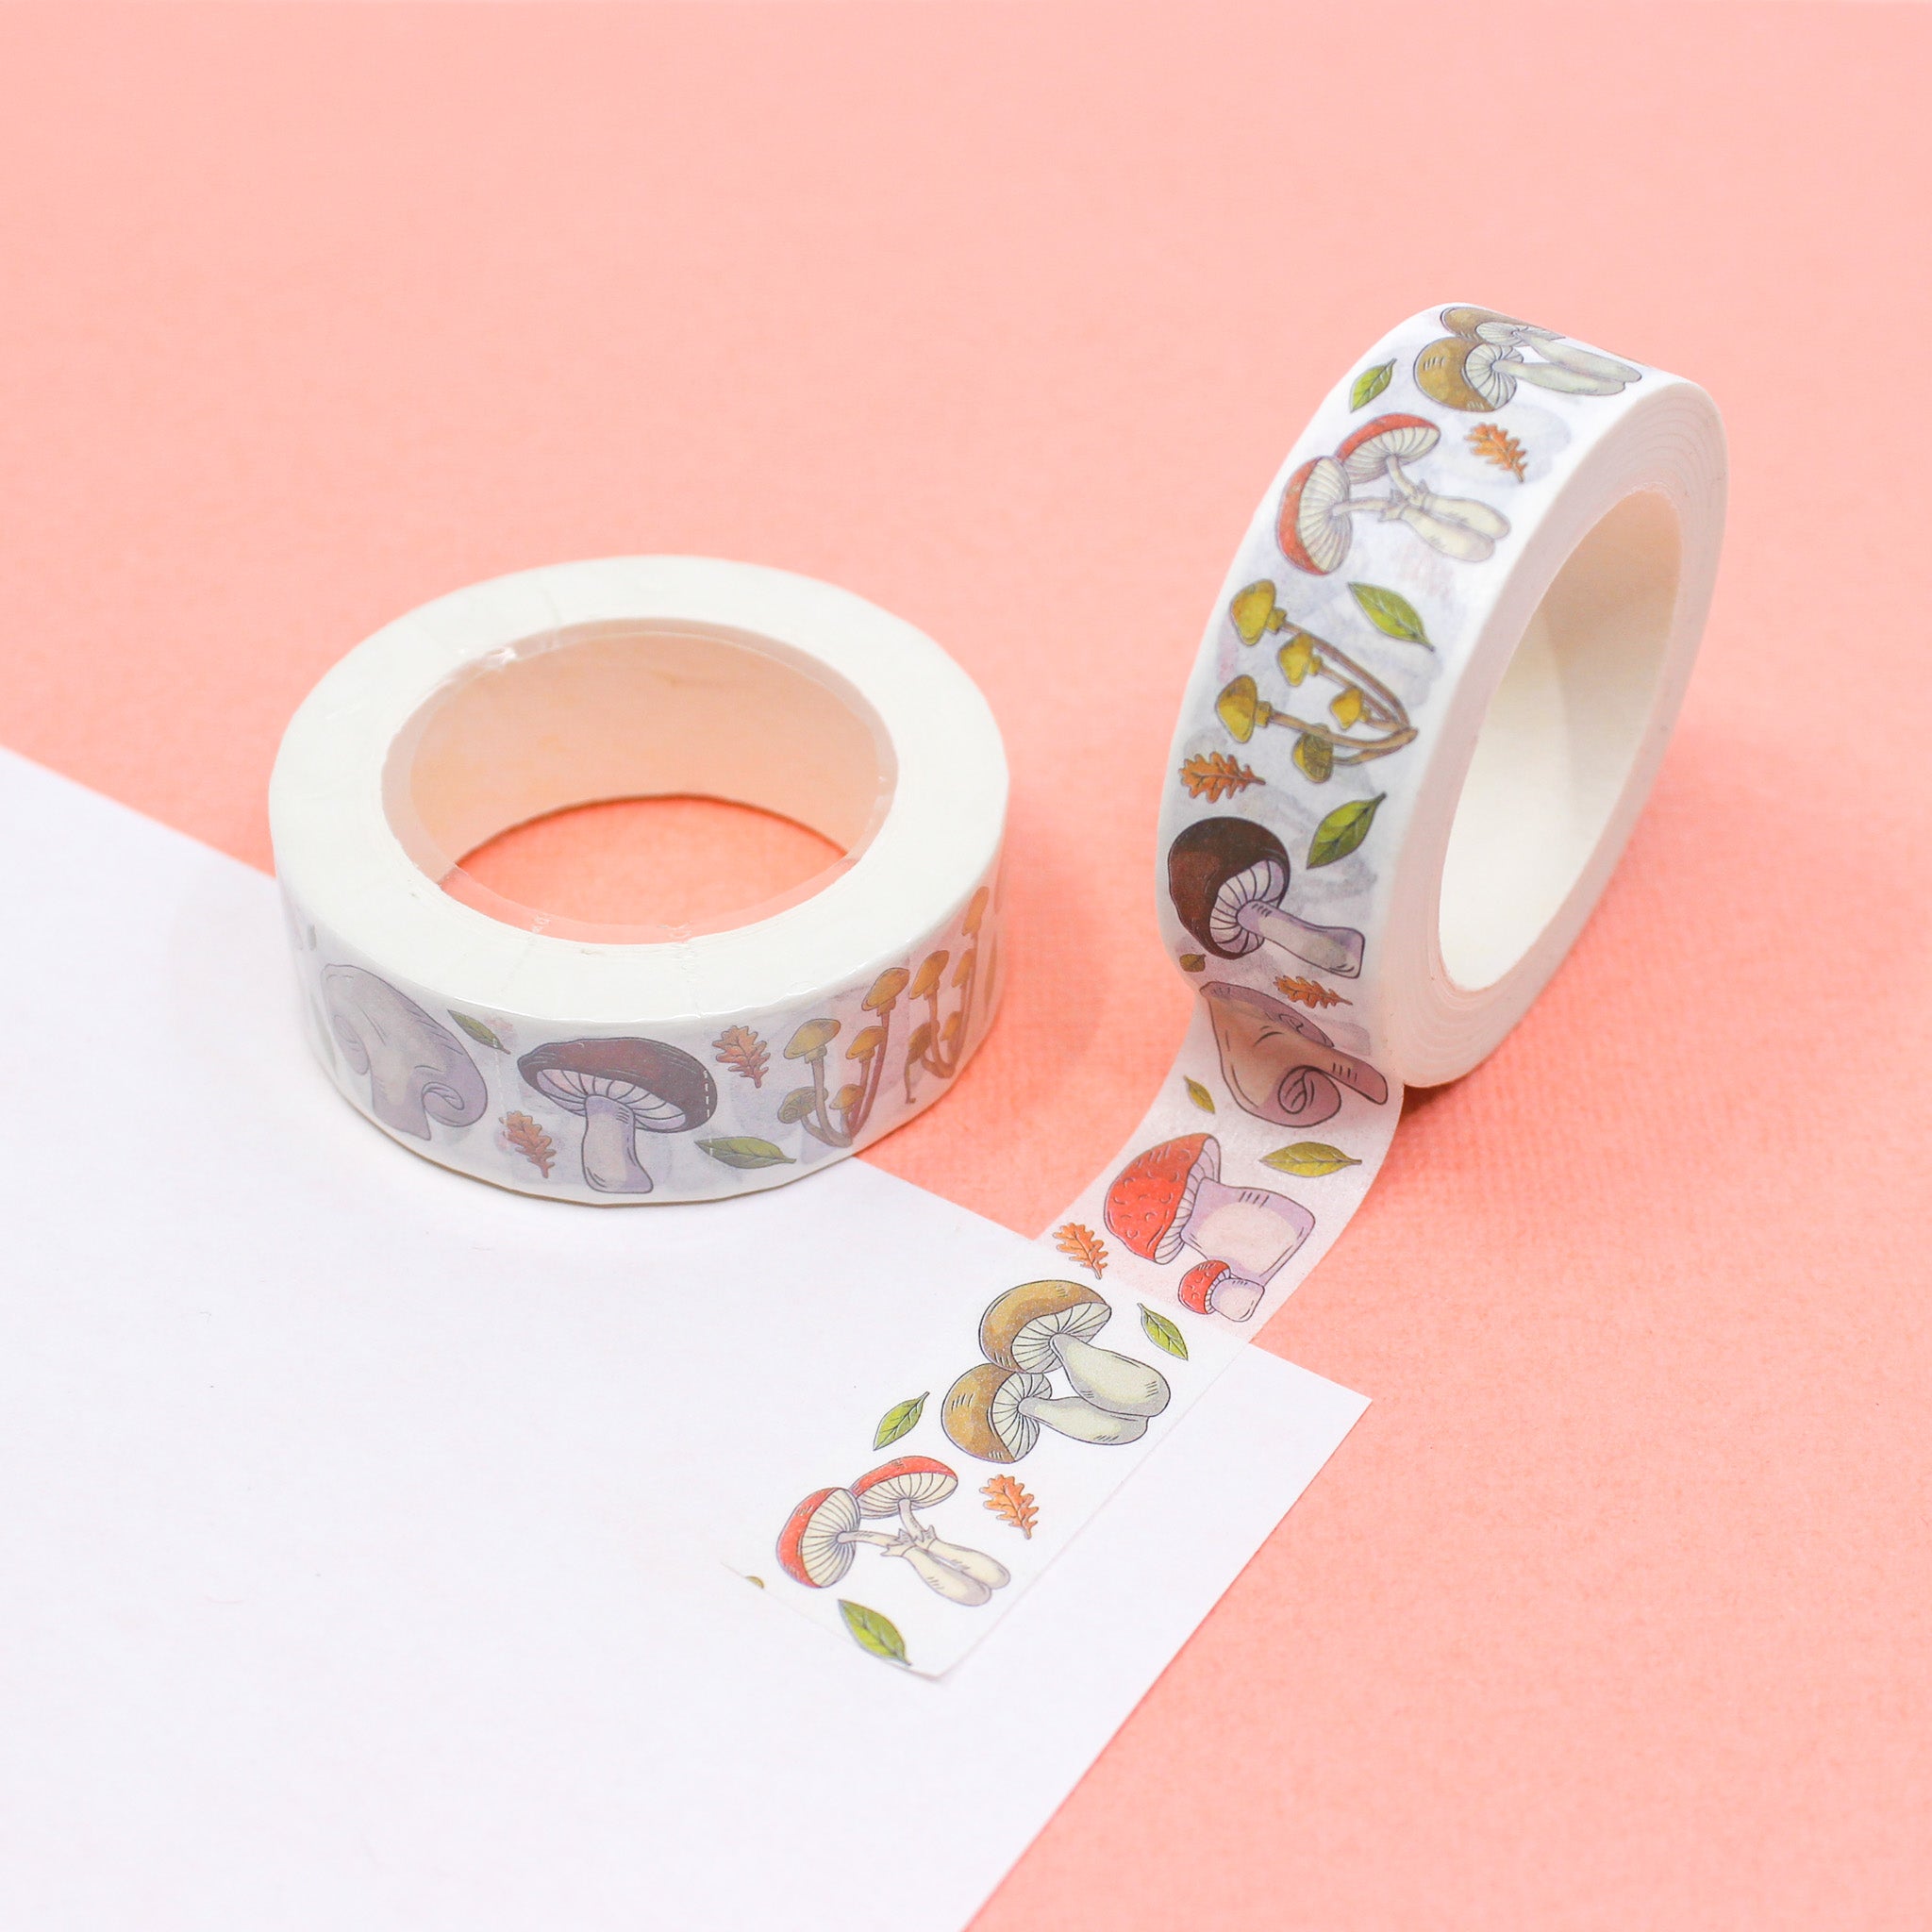 This is a yummy cooking mushrooms pattern washi tape from BBB Supplies Craft Shop